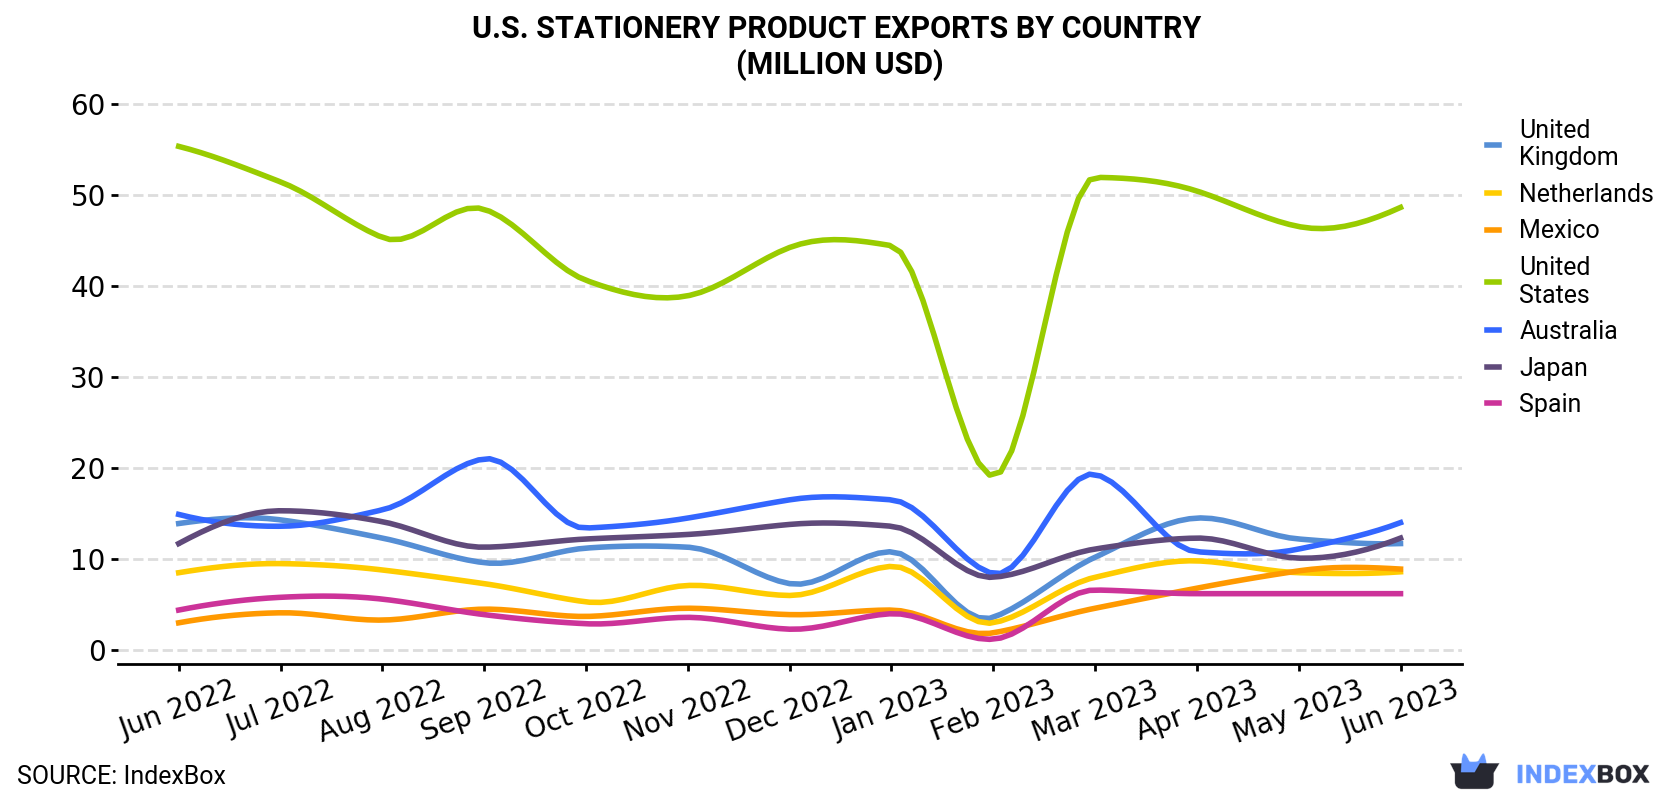 U.S. Stationery Product Exports By Country (Million USD)